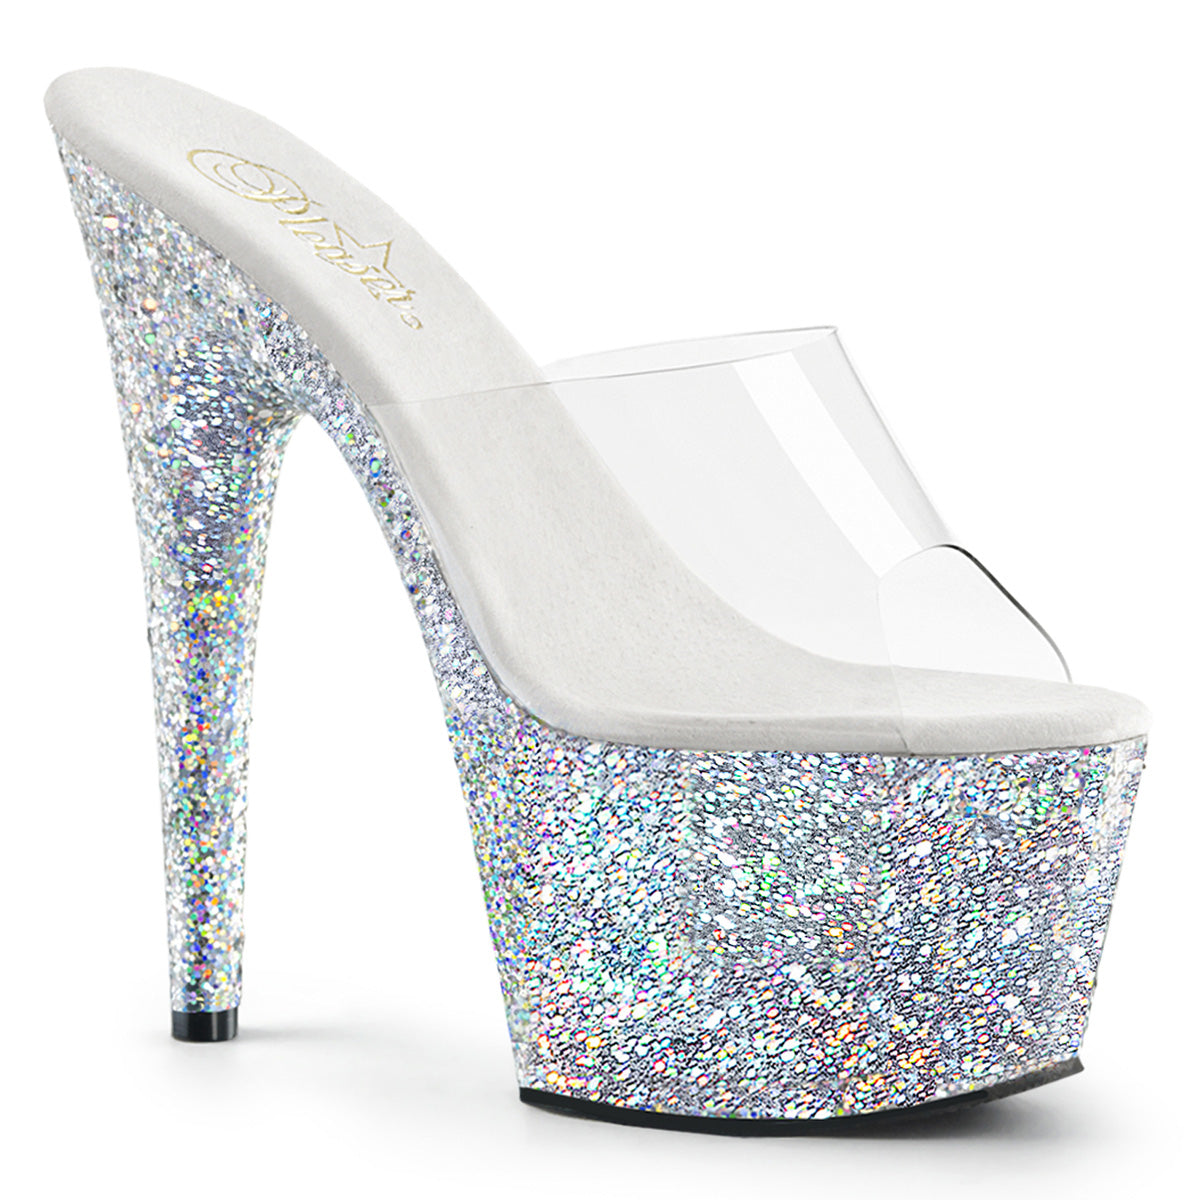 ADORE-701LG 7" Heel Clear Silver Glitter Platforms Sexy Shoe-Pleaser- Sexy Shoes